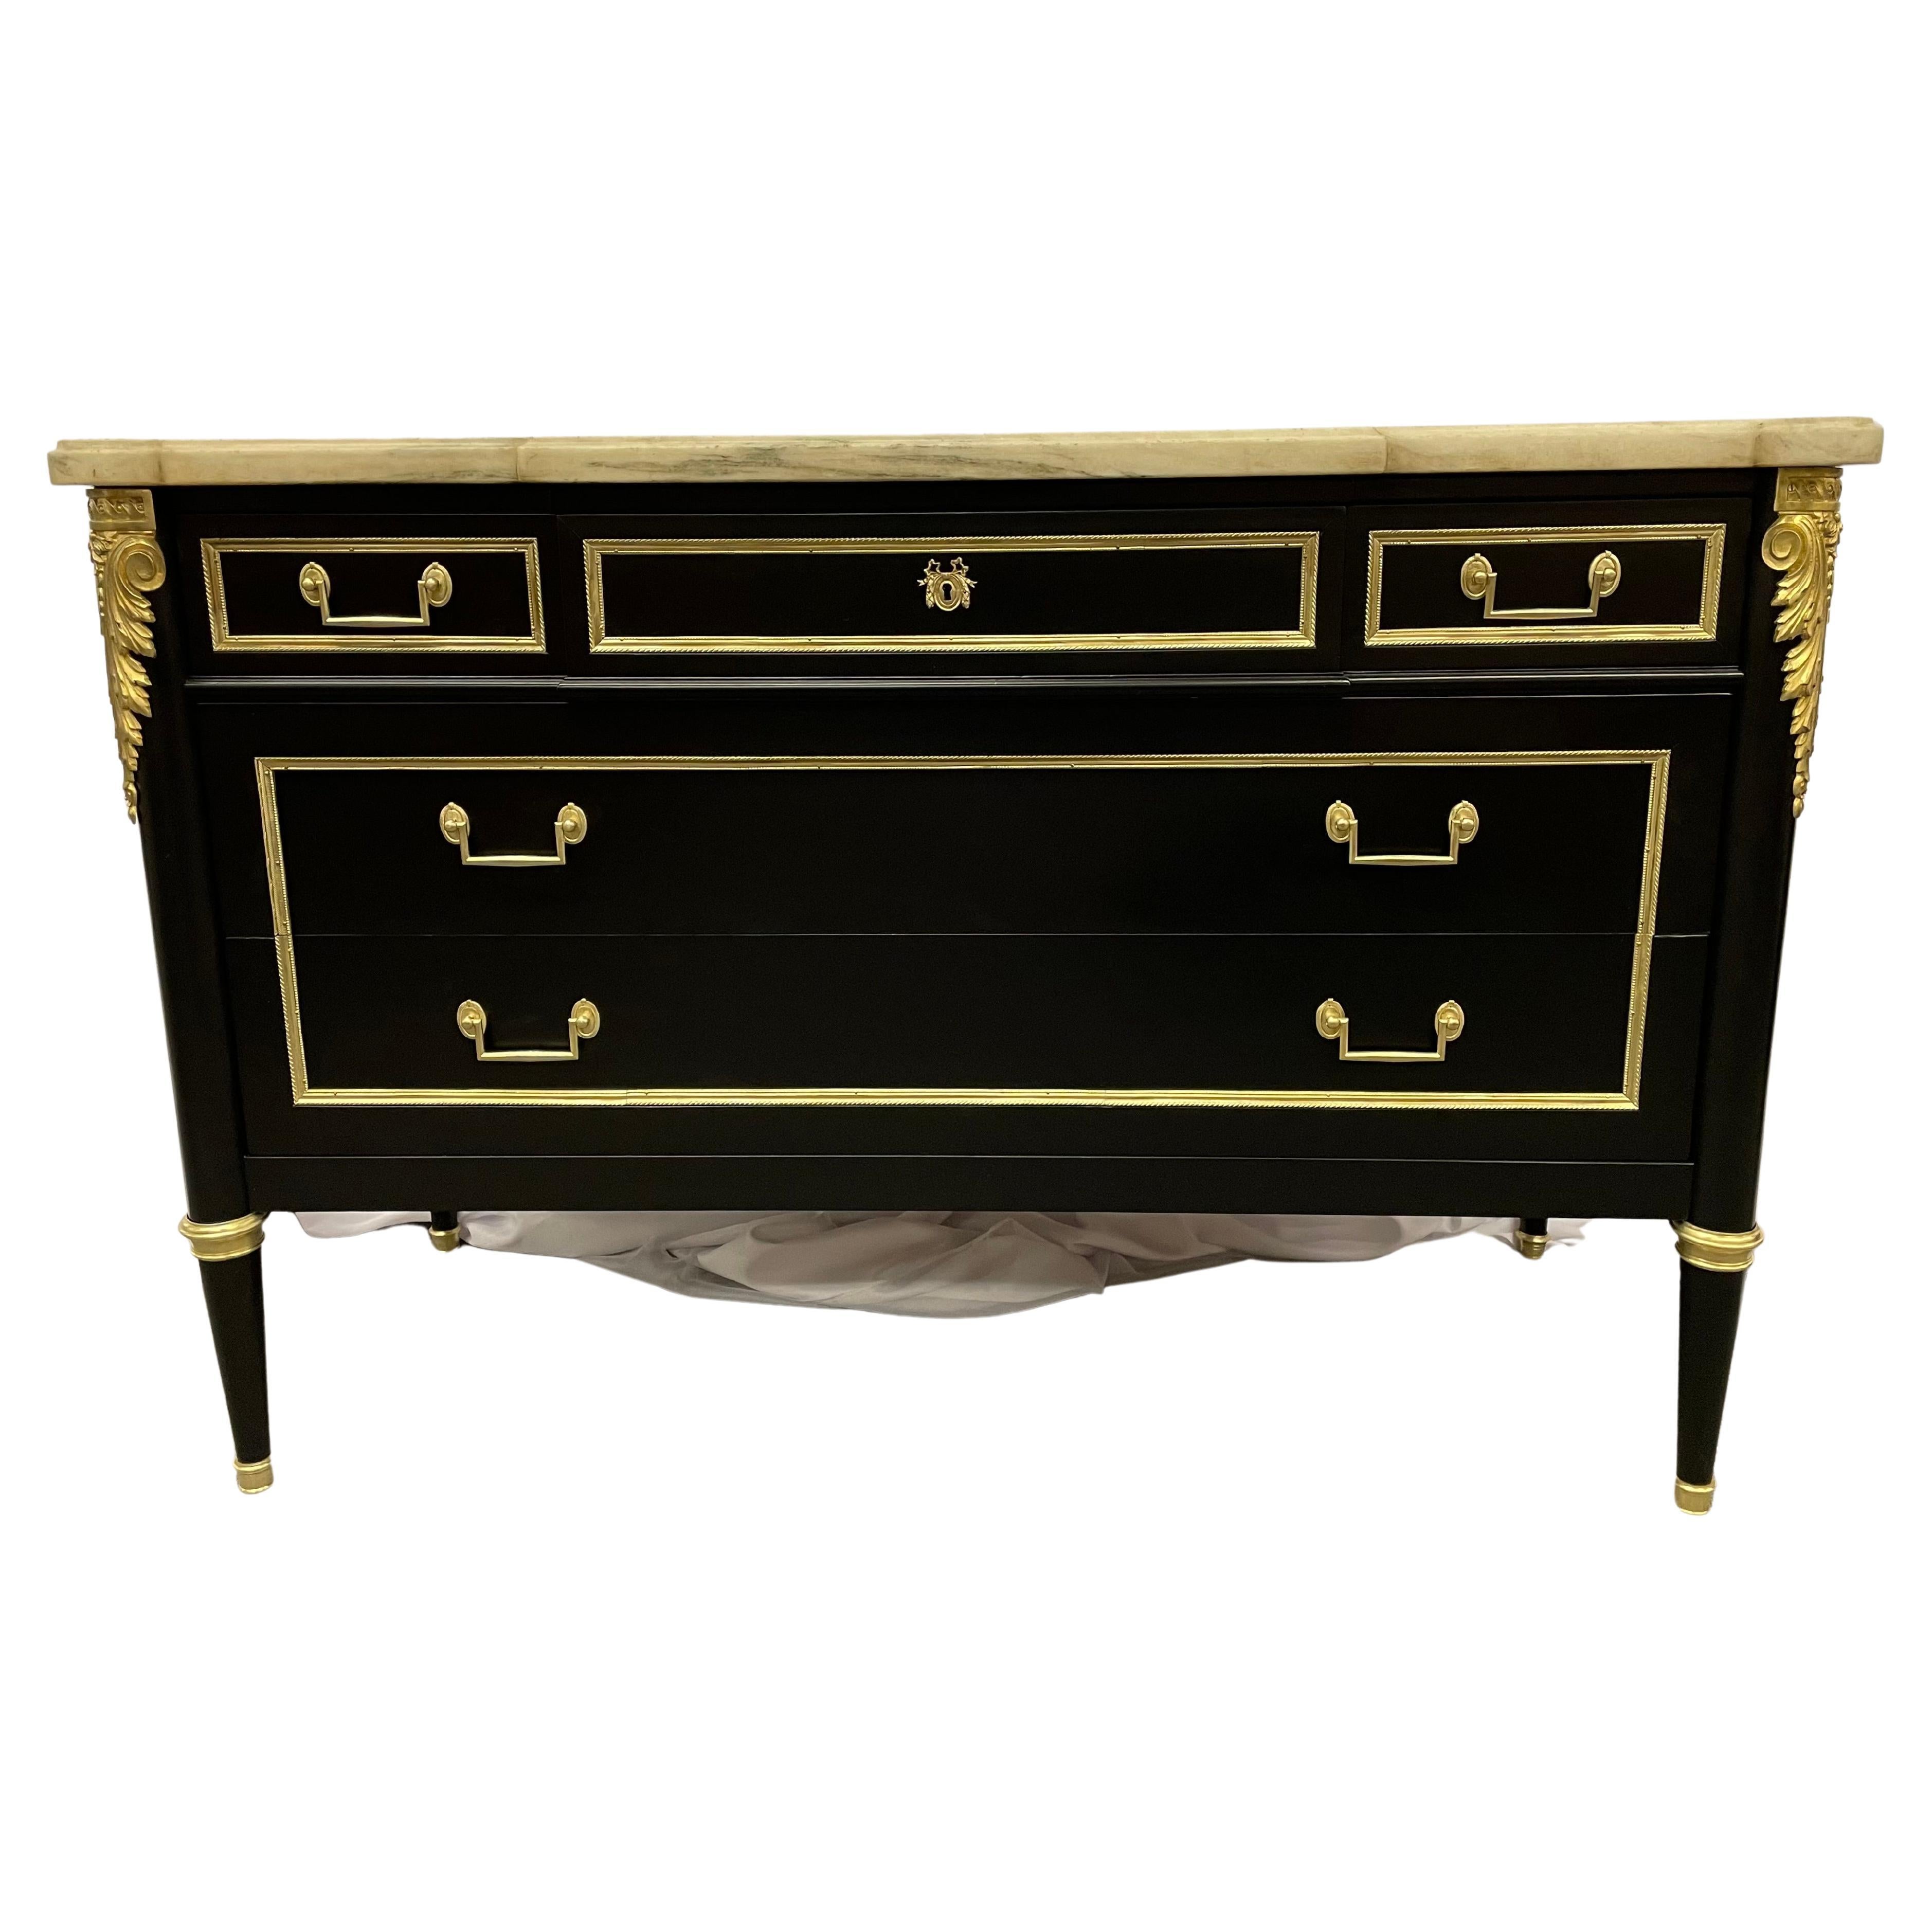 Maison Jansen Ebony bronze mounted commode, chest, dresser having bronze mounts with bronze framed drawers and side panels supporting a White Carrera Marble Top. The stunning commode has three over two bronze framed drawers with bronze drawer pulls